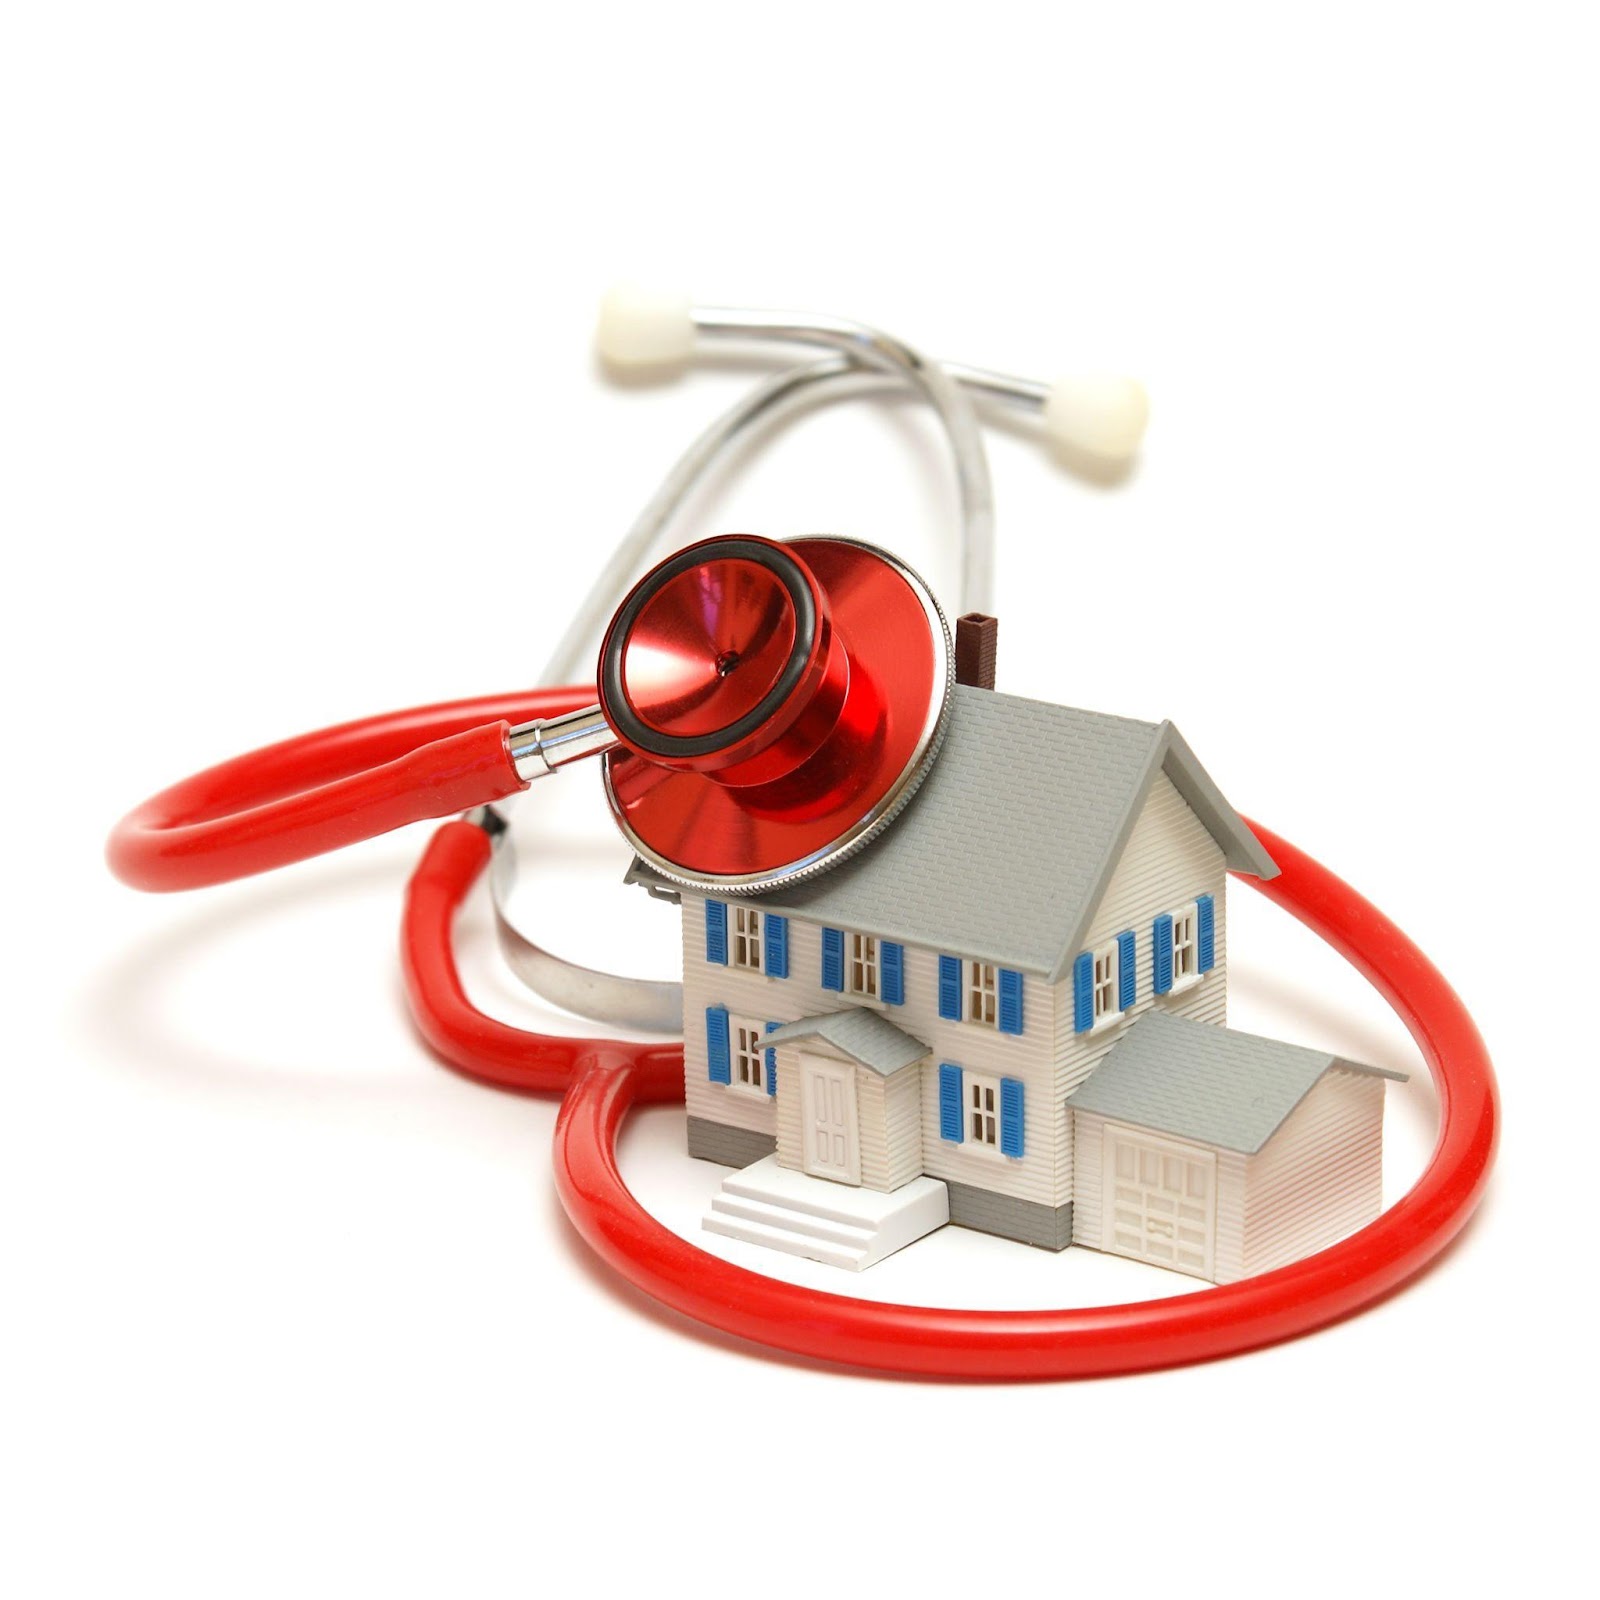 How Can A Nurse Determine The Mortgage They Can Afford?